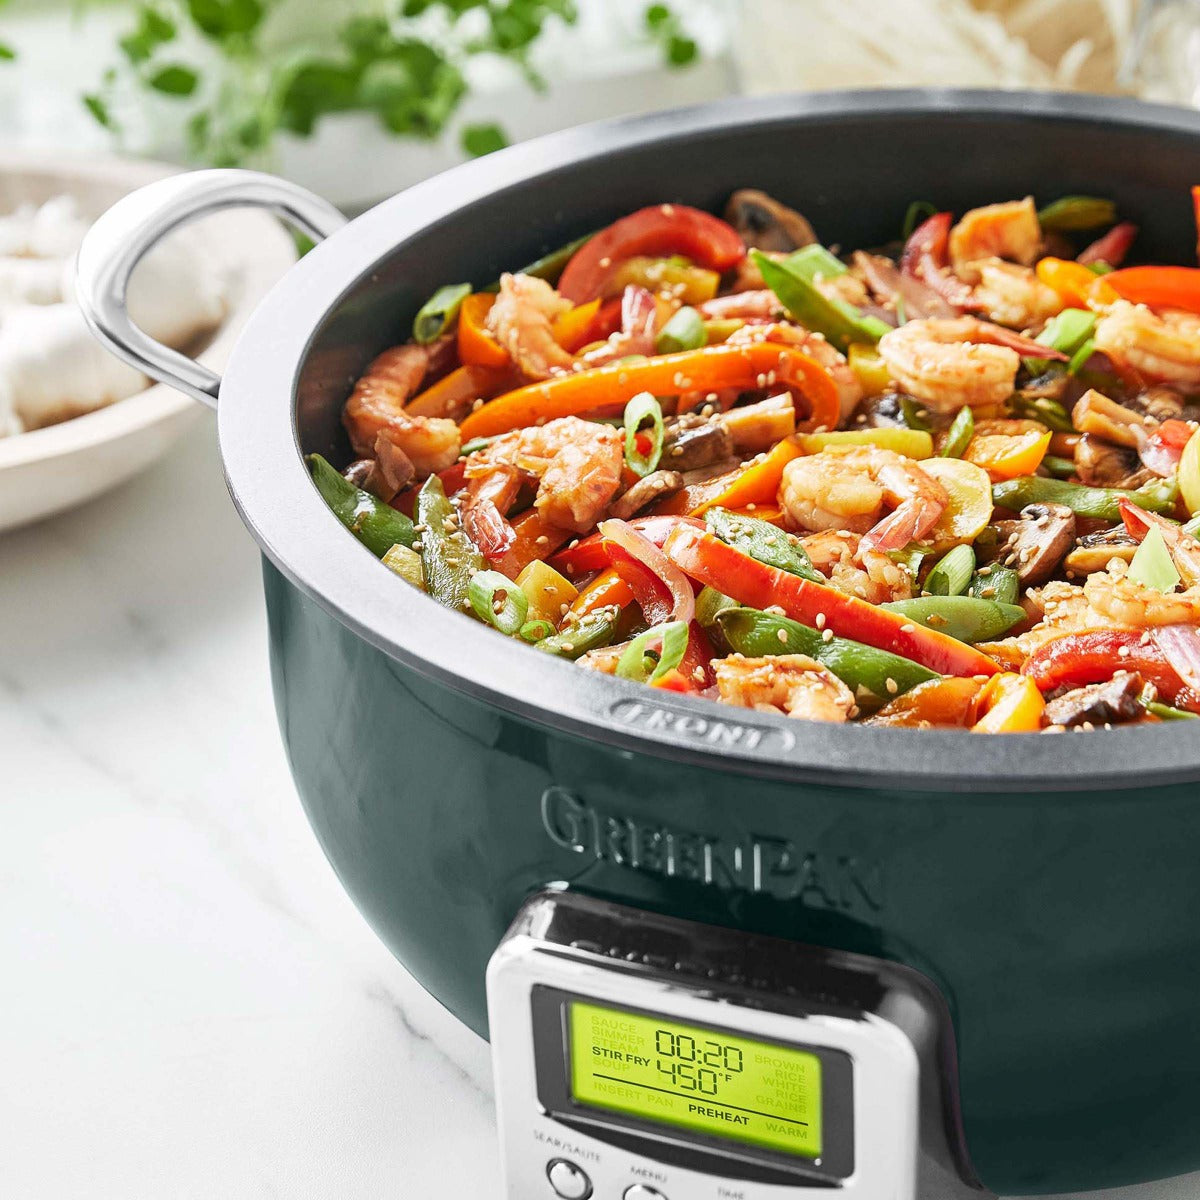 Healthy Non-Toxic PFAS Free Cookware - Premiere Convection Air Fry Oven Featuring PFAS-Free Nonstick by GreenPan